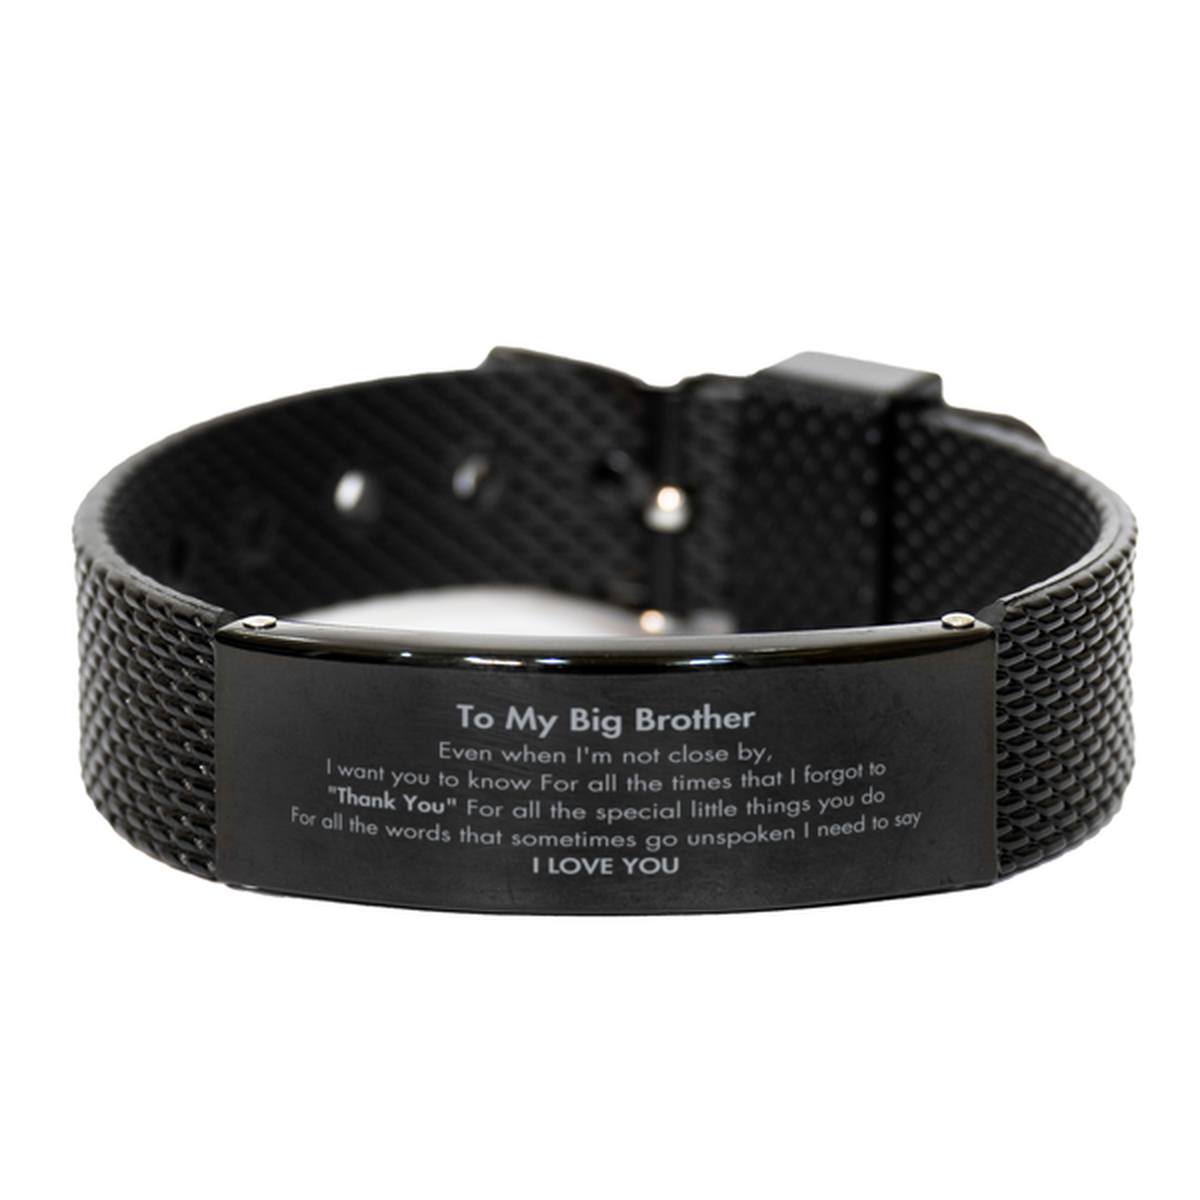 Thank You Gifts for Big Brother, Keepsake Black Shark Mesh Bracelet Gifts for Big Brother Birthday Mother's day Father's Day Big Brother For all the words That sometimes go unspoken I need to say I LOVE YOU